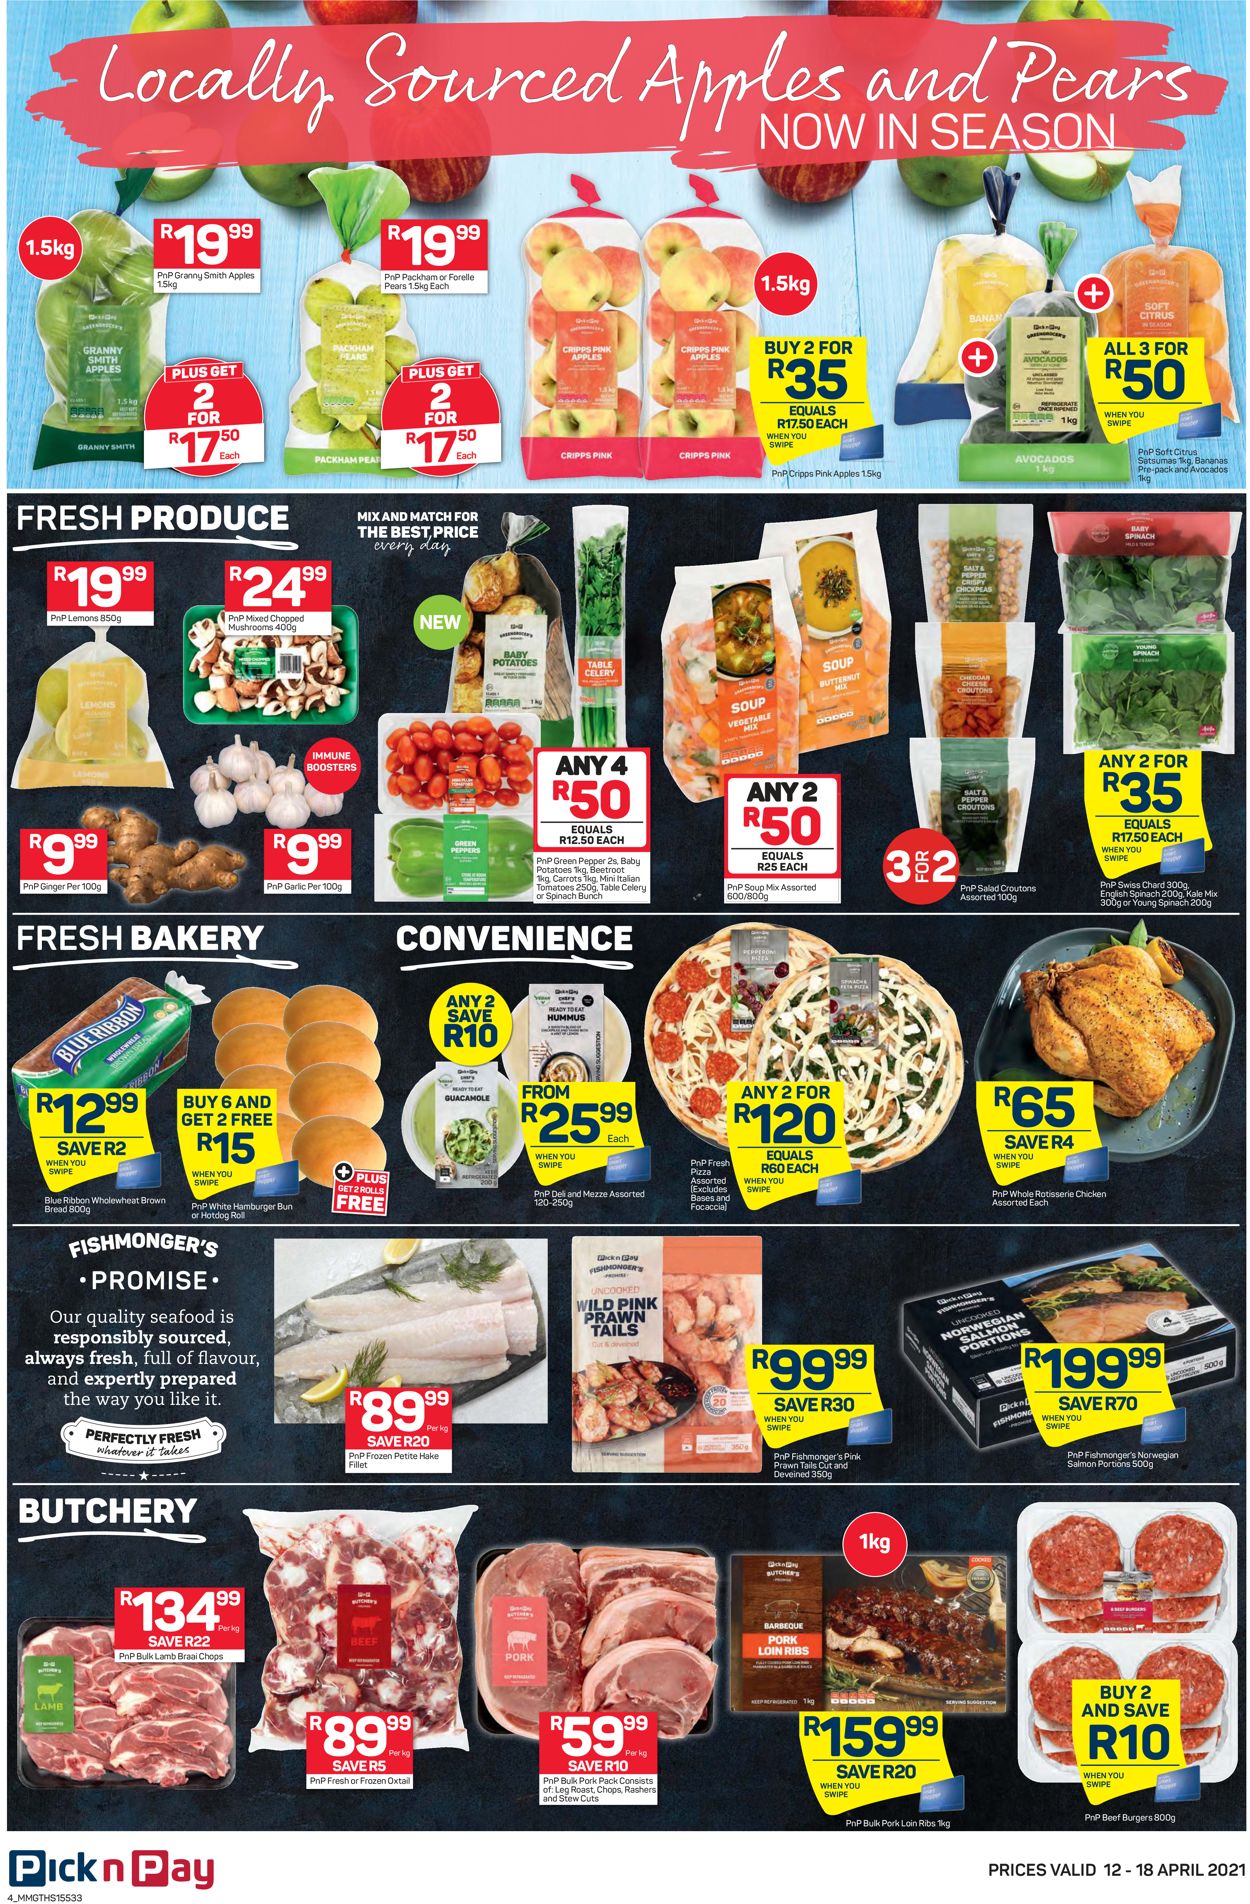 Pick n Pay Catalogue - 2021/04/12-2021/04/18 (Page 4)